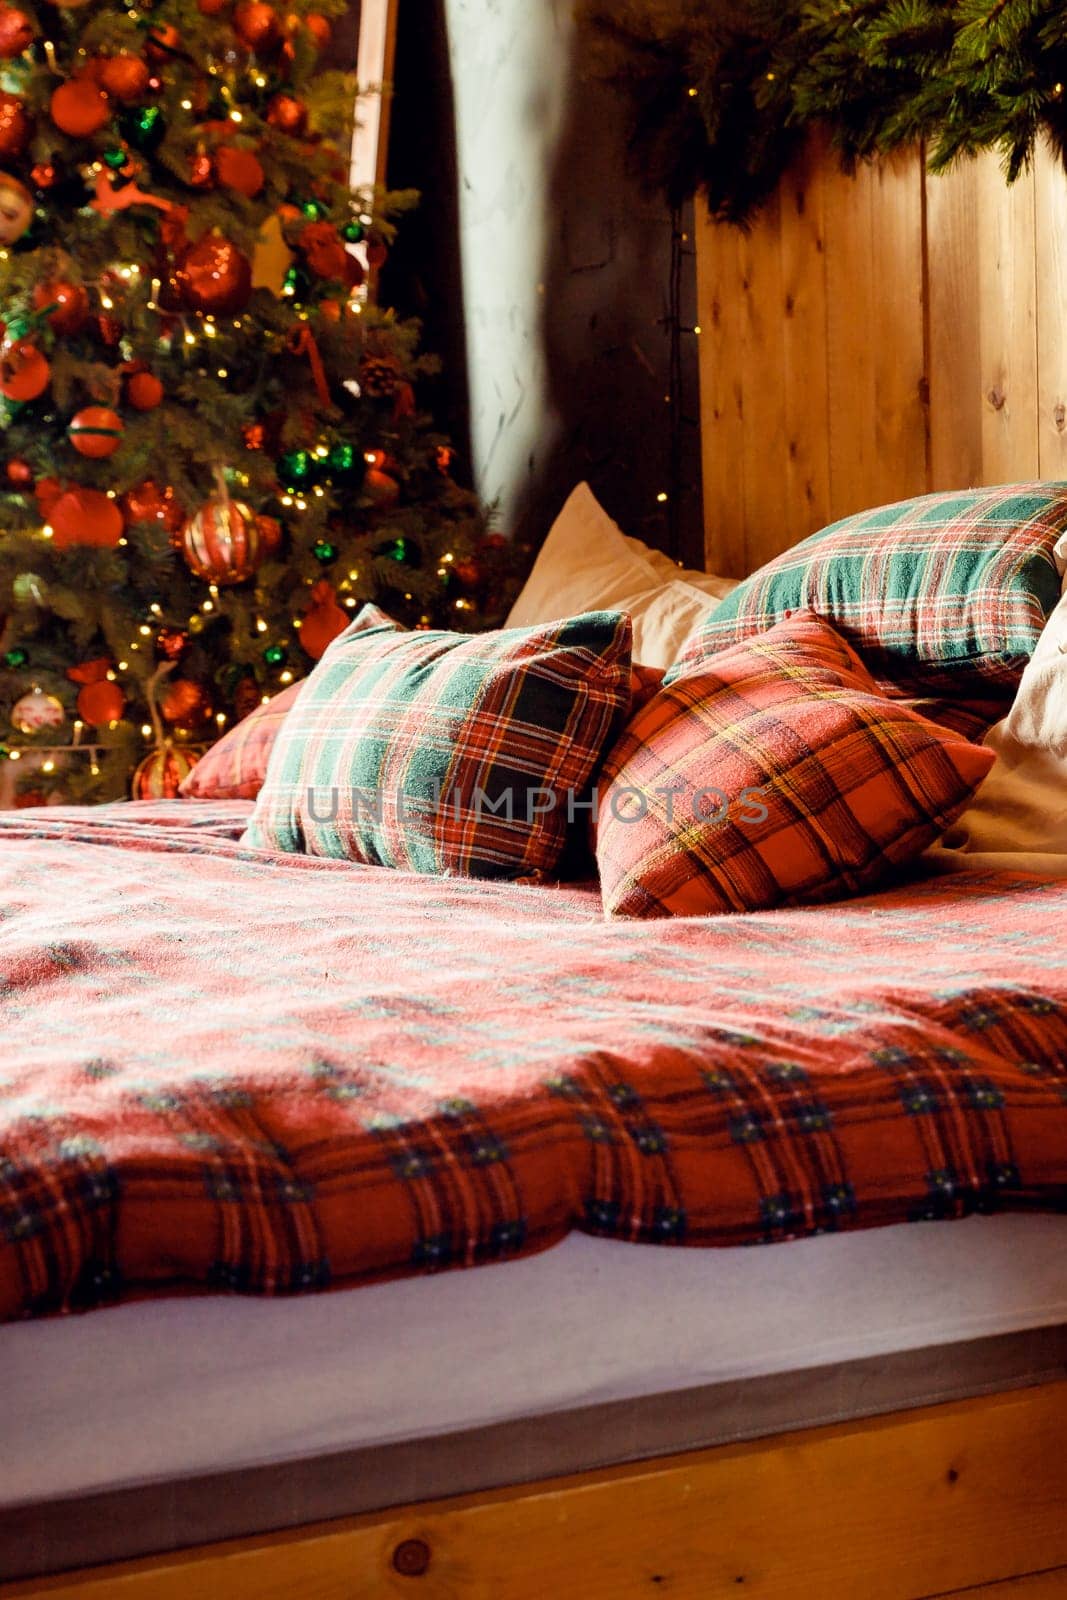 Winter Xmas Hygge home decor. Festive cozy bedroom in Skandinavian style with bed and many pillows, decorated christmas tree with gifts. Concept new year and holidays. Interior design bedroom. by YuliaYaspe1979